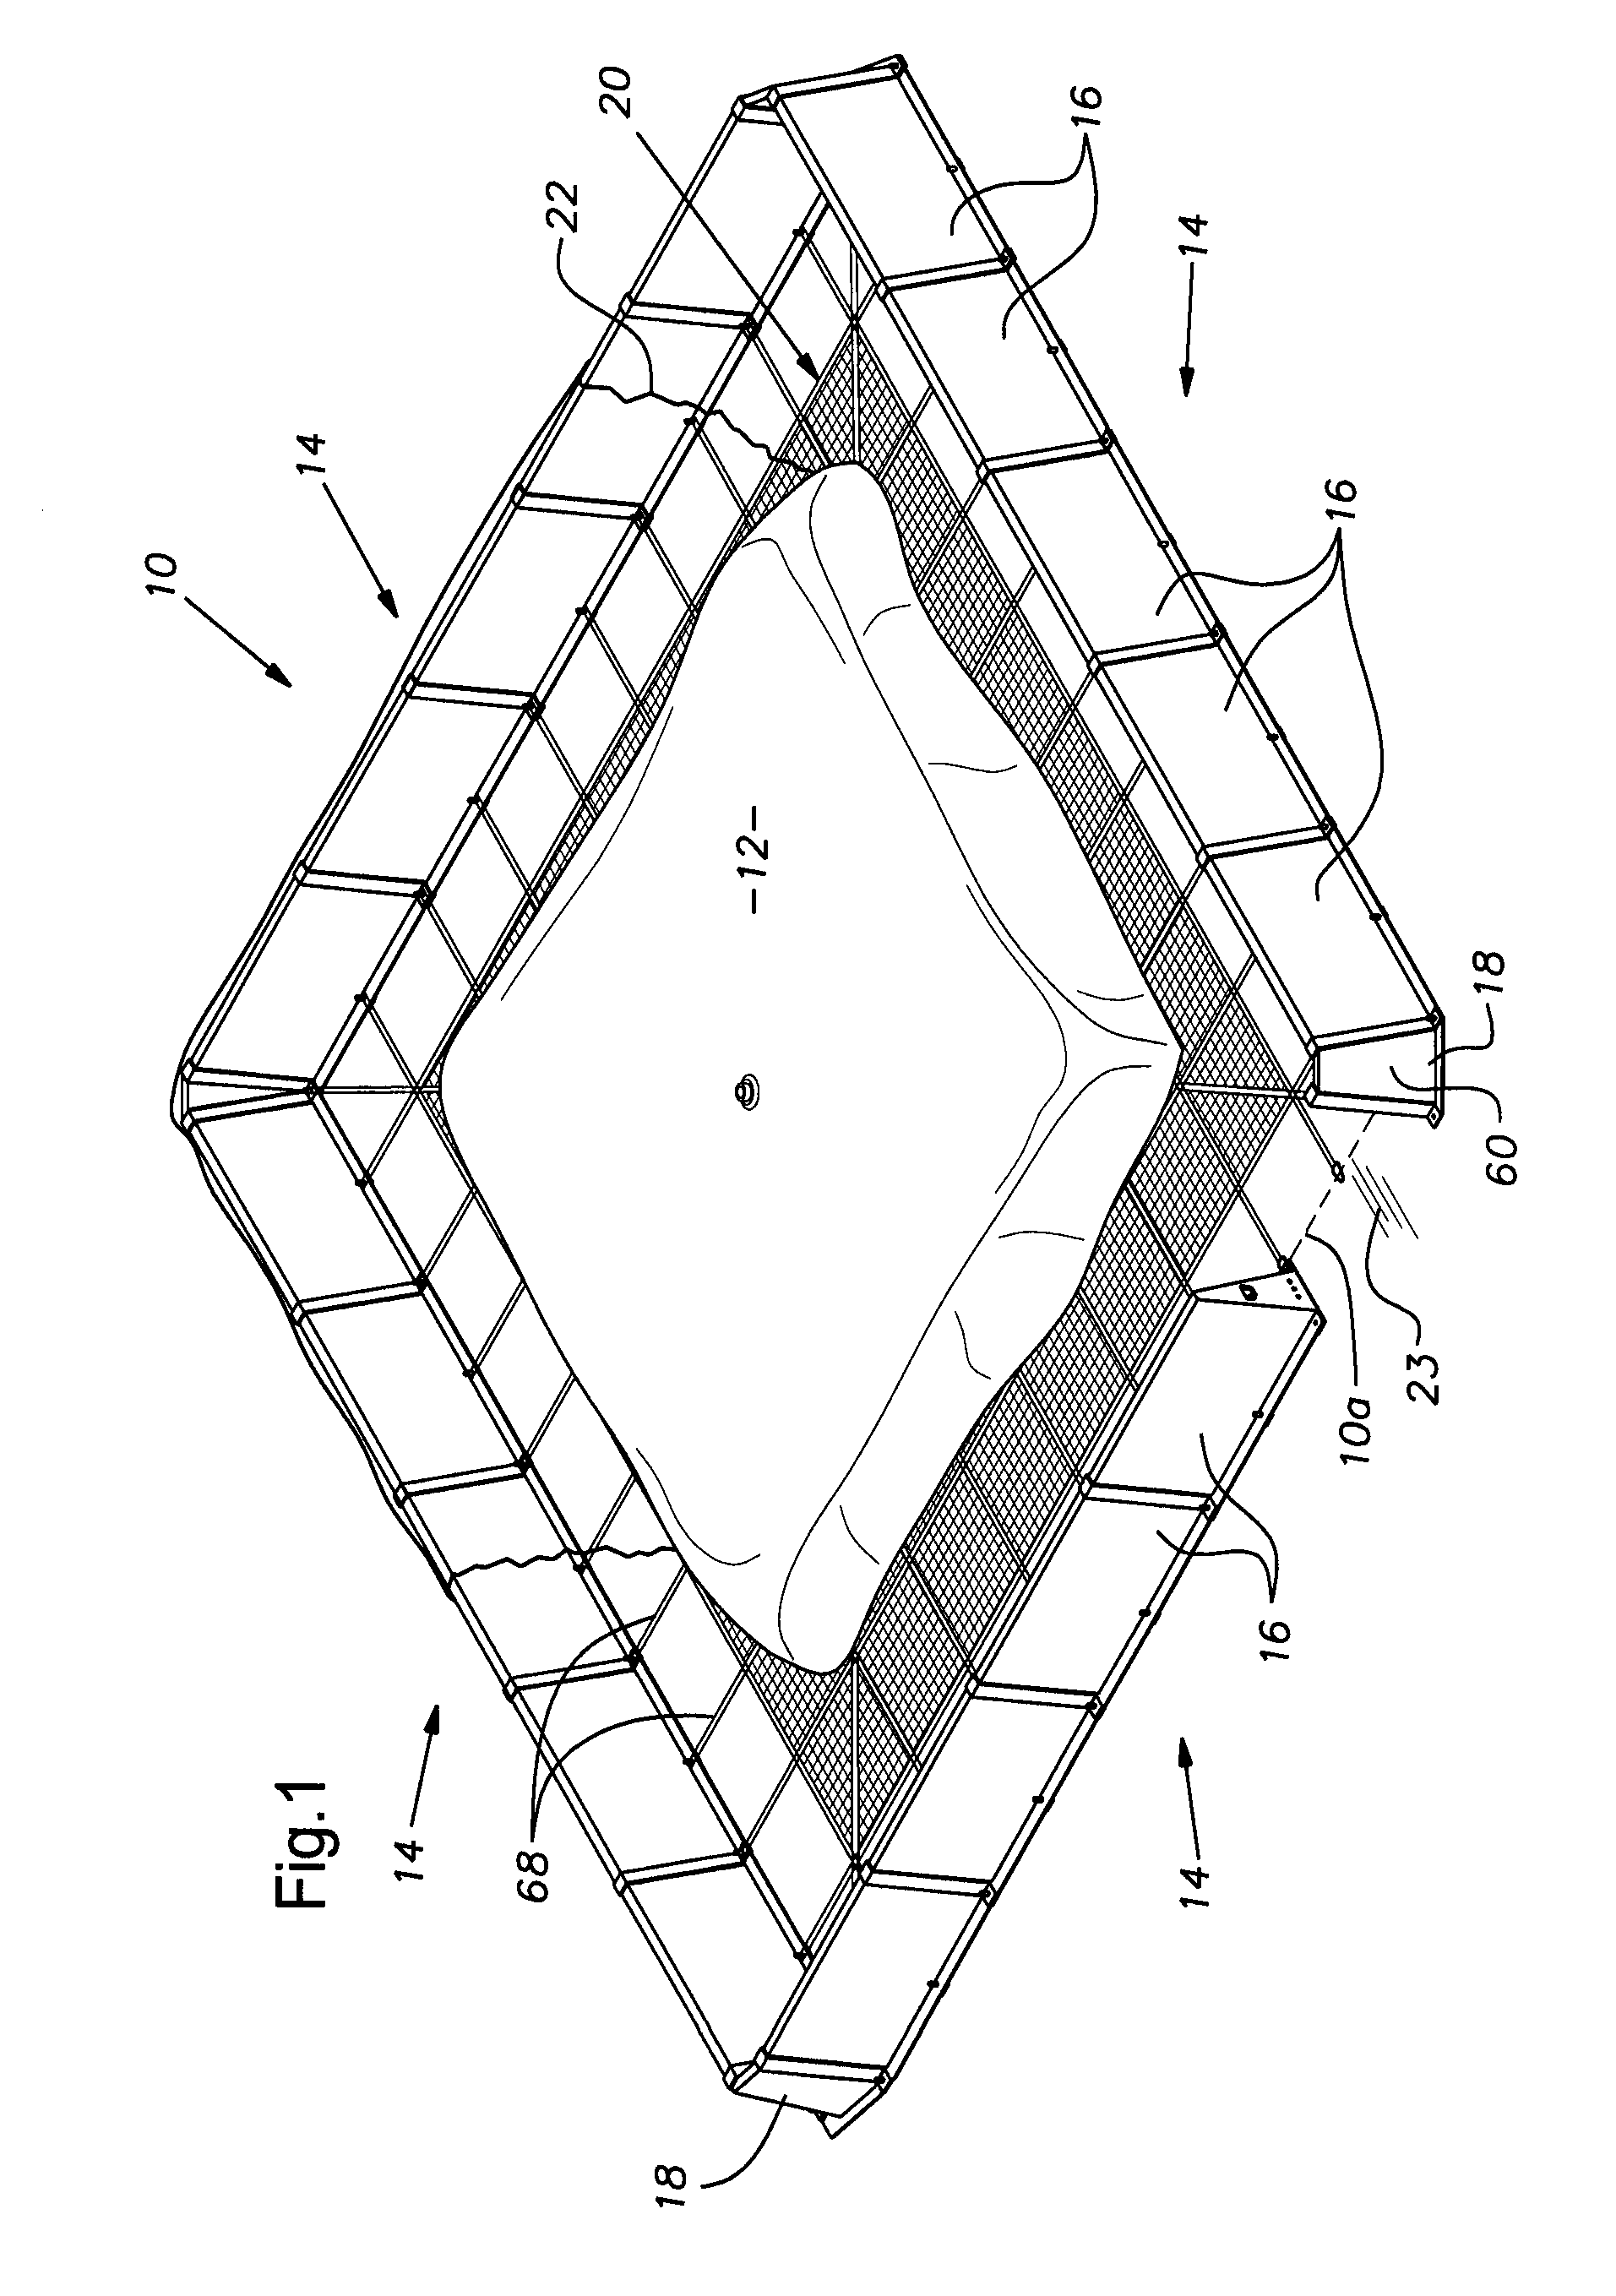 Deployable containment system